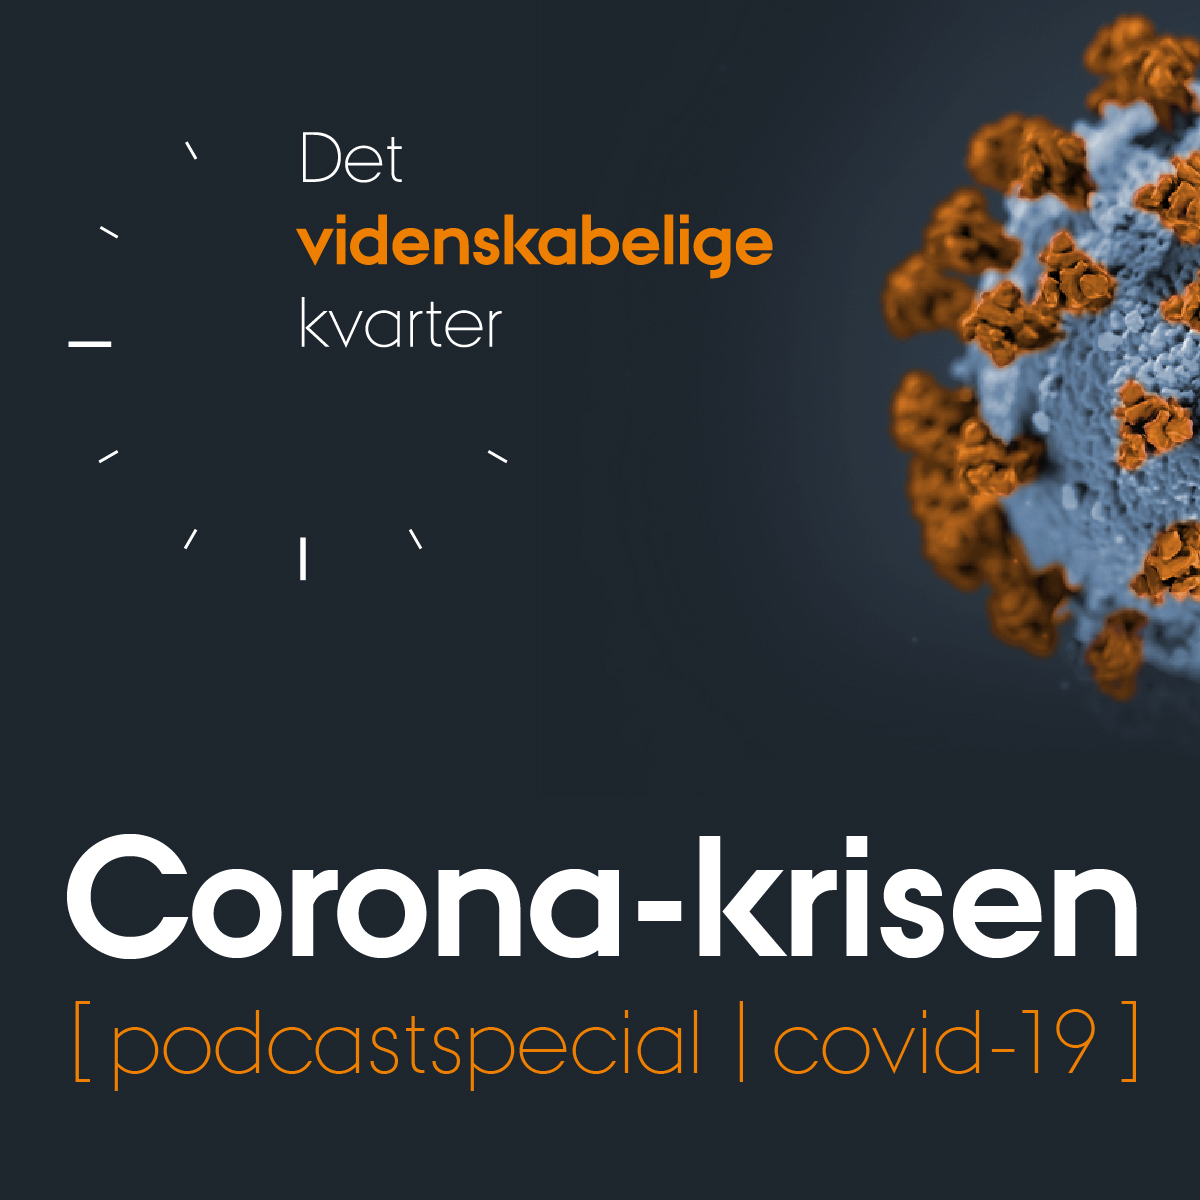 Podcast series on the coronavirus crisis by 15 Minutes of Science at Aarhus BSS